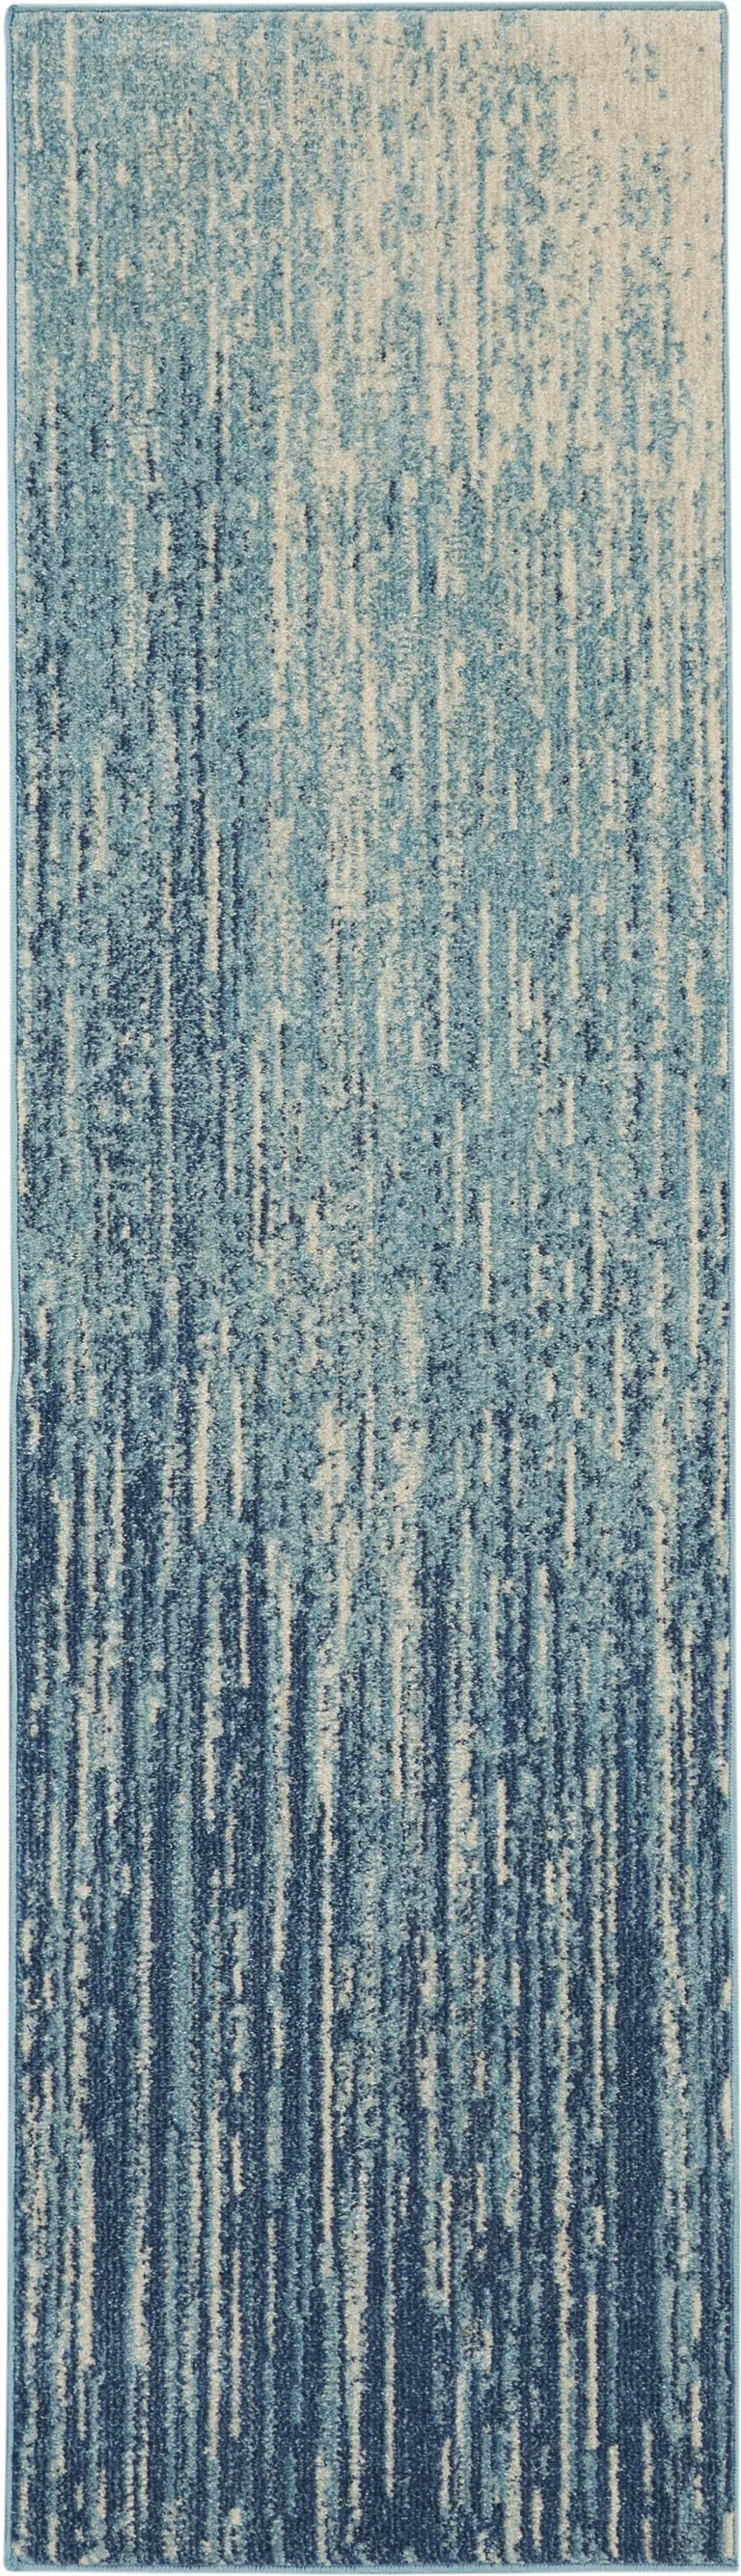 Navy and Light Blue Abstract Runner Rug Photo 1